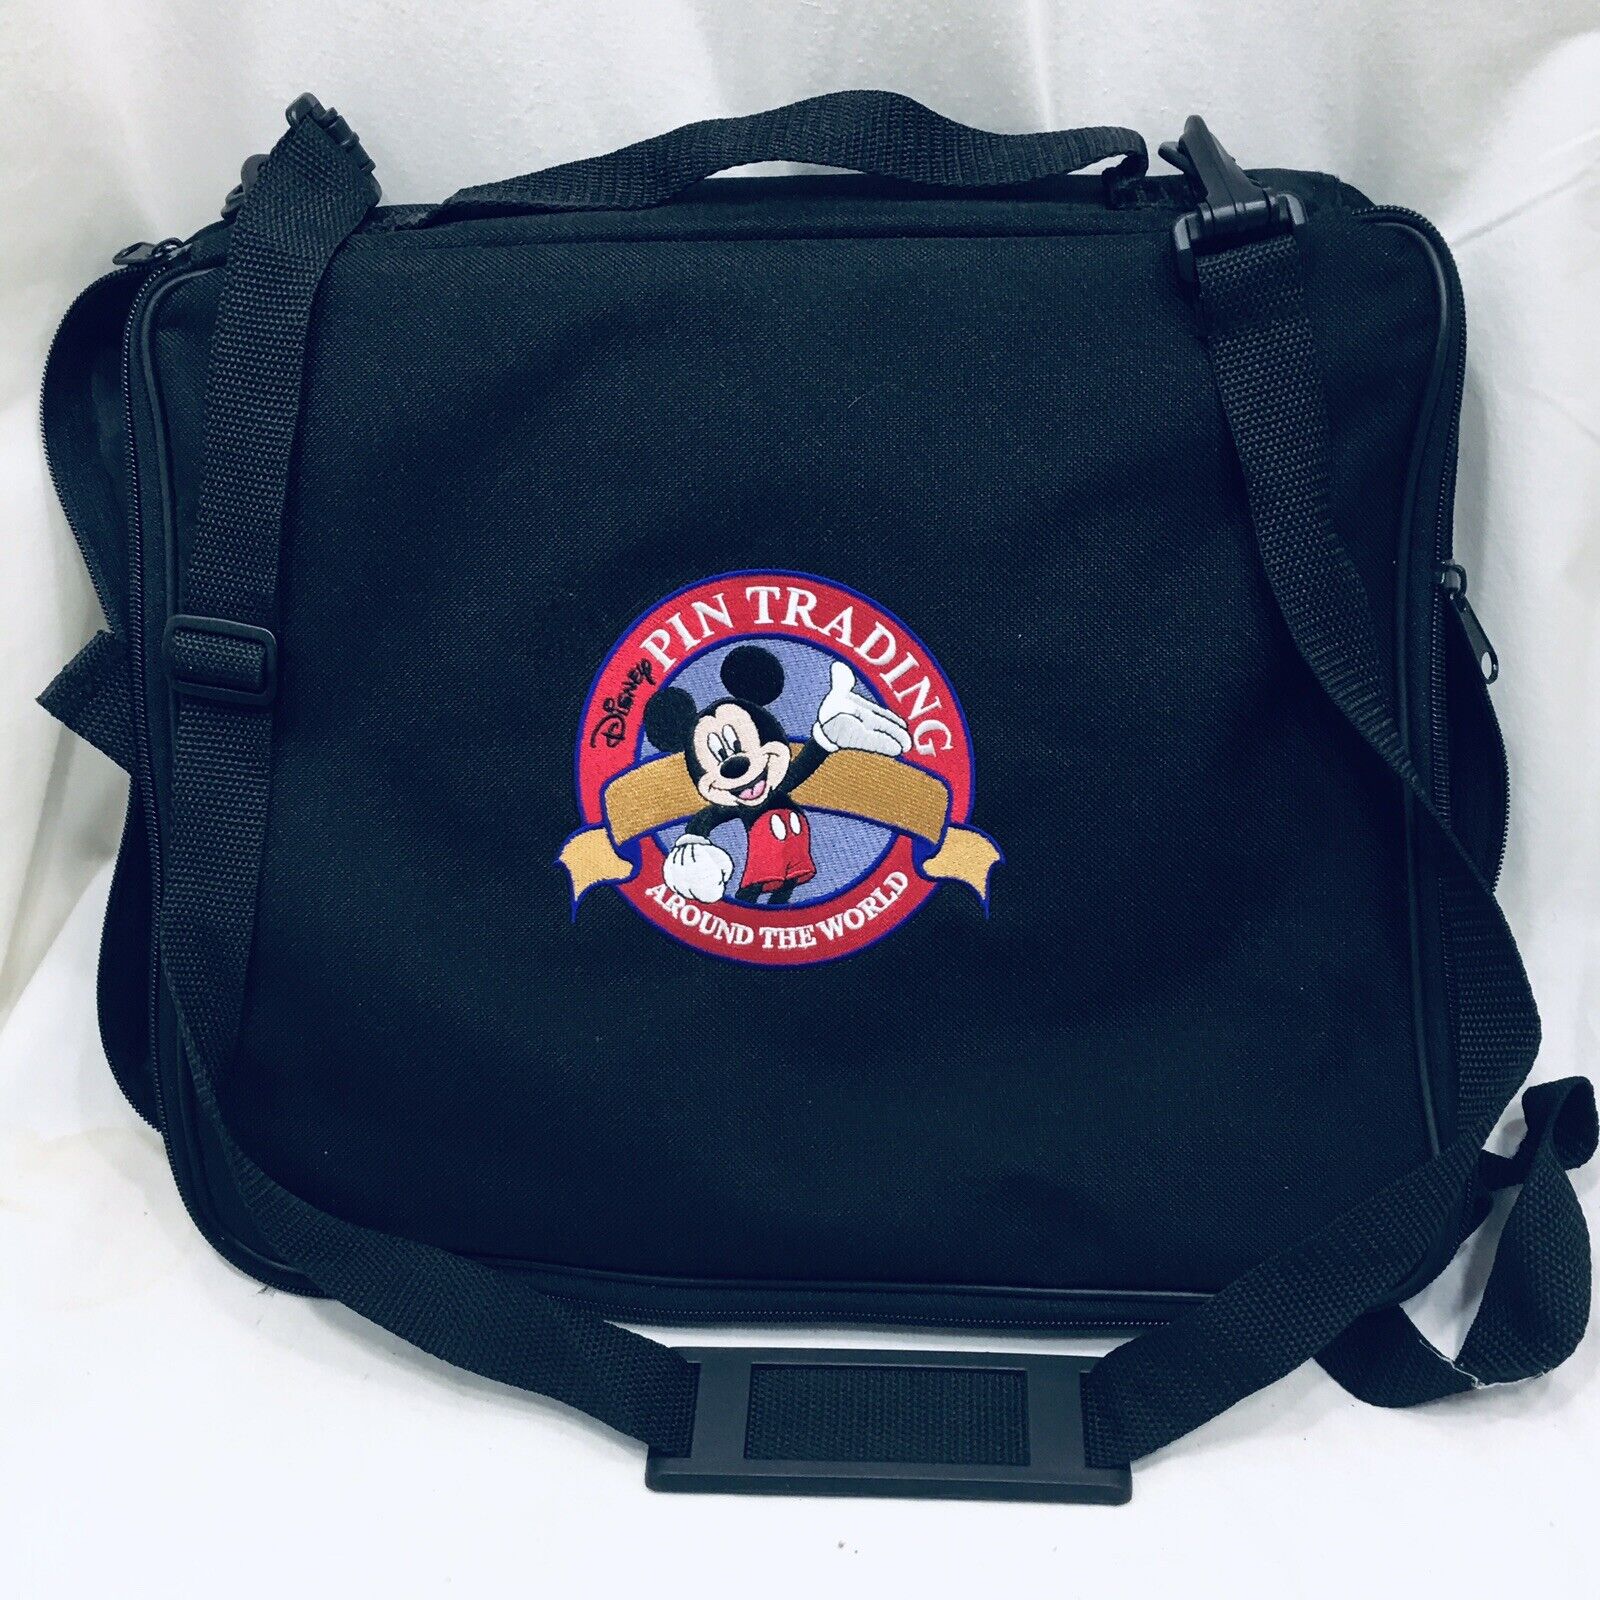 Disney Parks Exclusive Pin Trading Around The World Bag Logo Strap Large Size